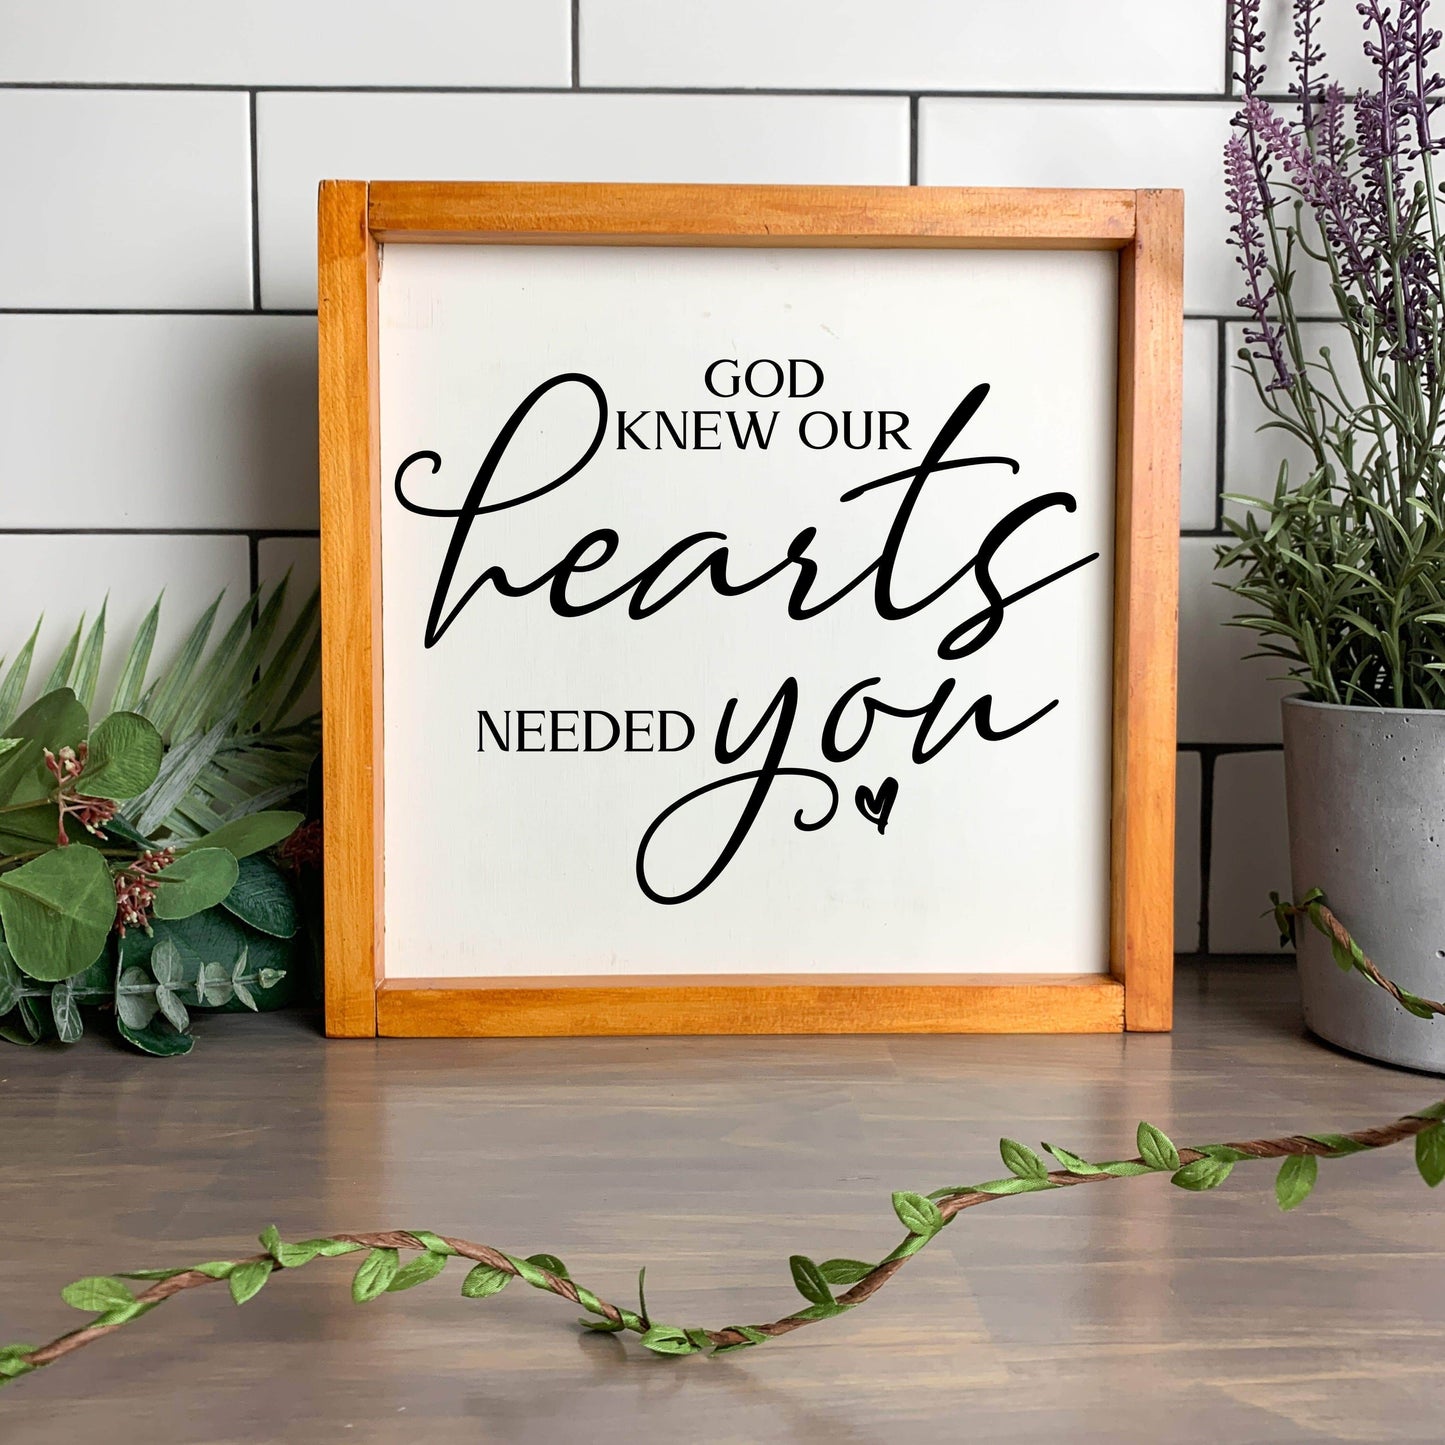 God Knew our Hearts needed You framed wood sign, farmhouse sign, rustic decor, home decor